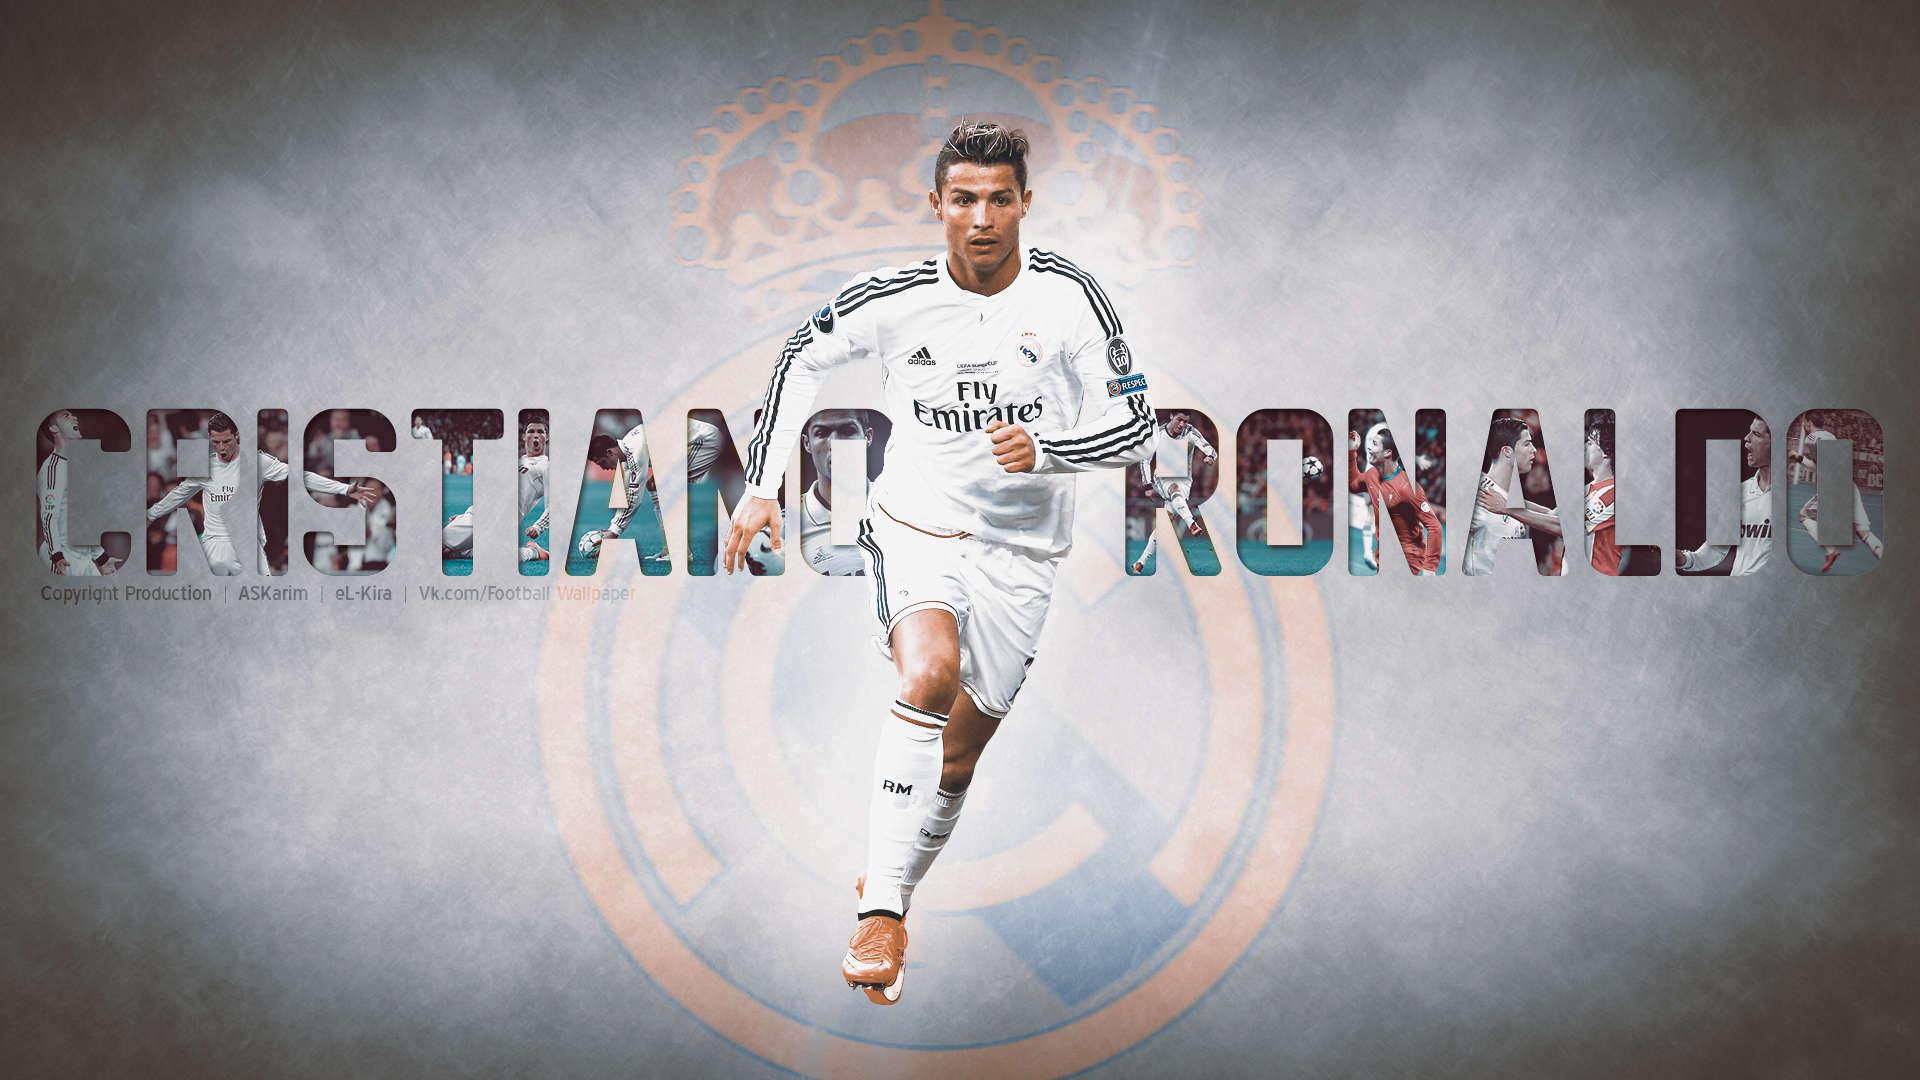 Wallpaper The Worlds Catalog Of Ideas With Cristiano Ronaldo Full HD